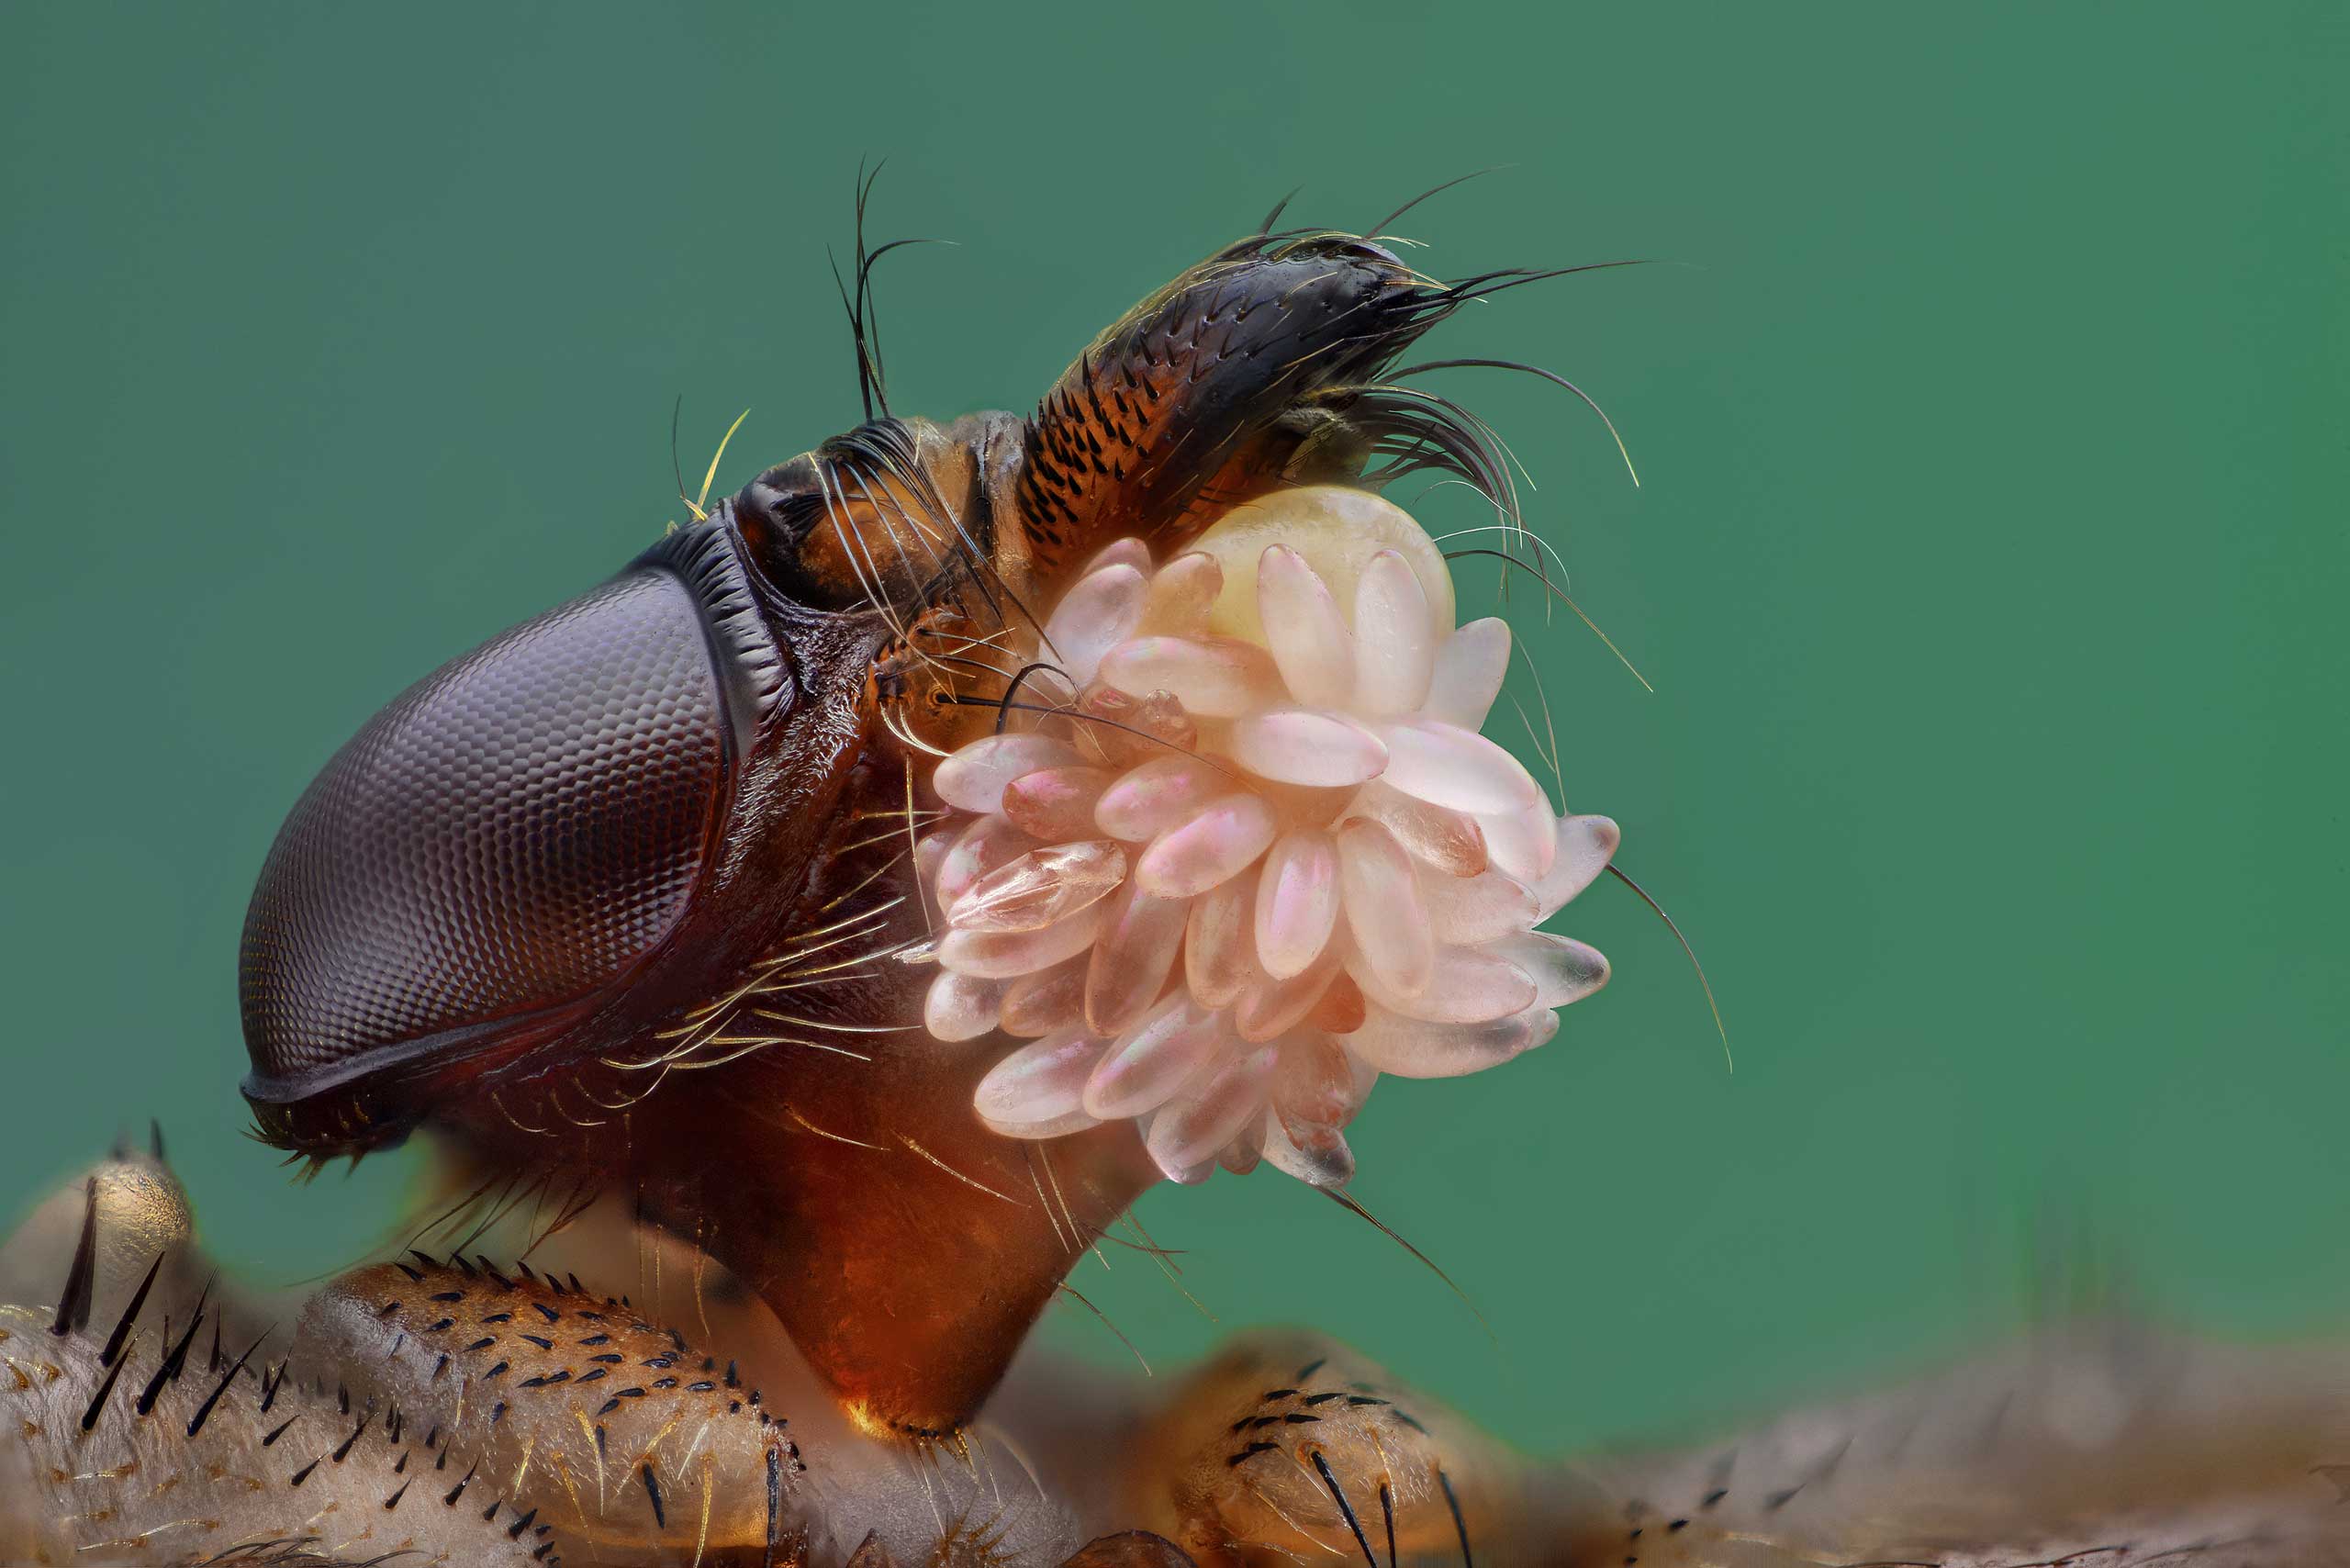 A louse fly with its eggs